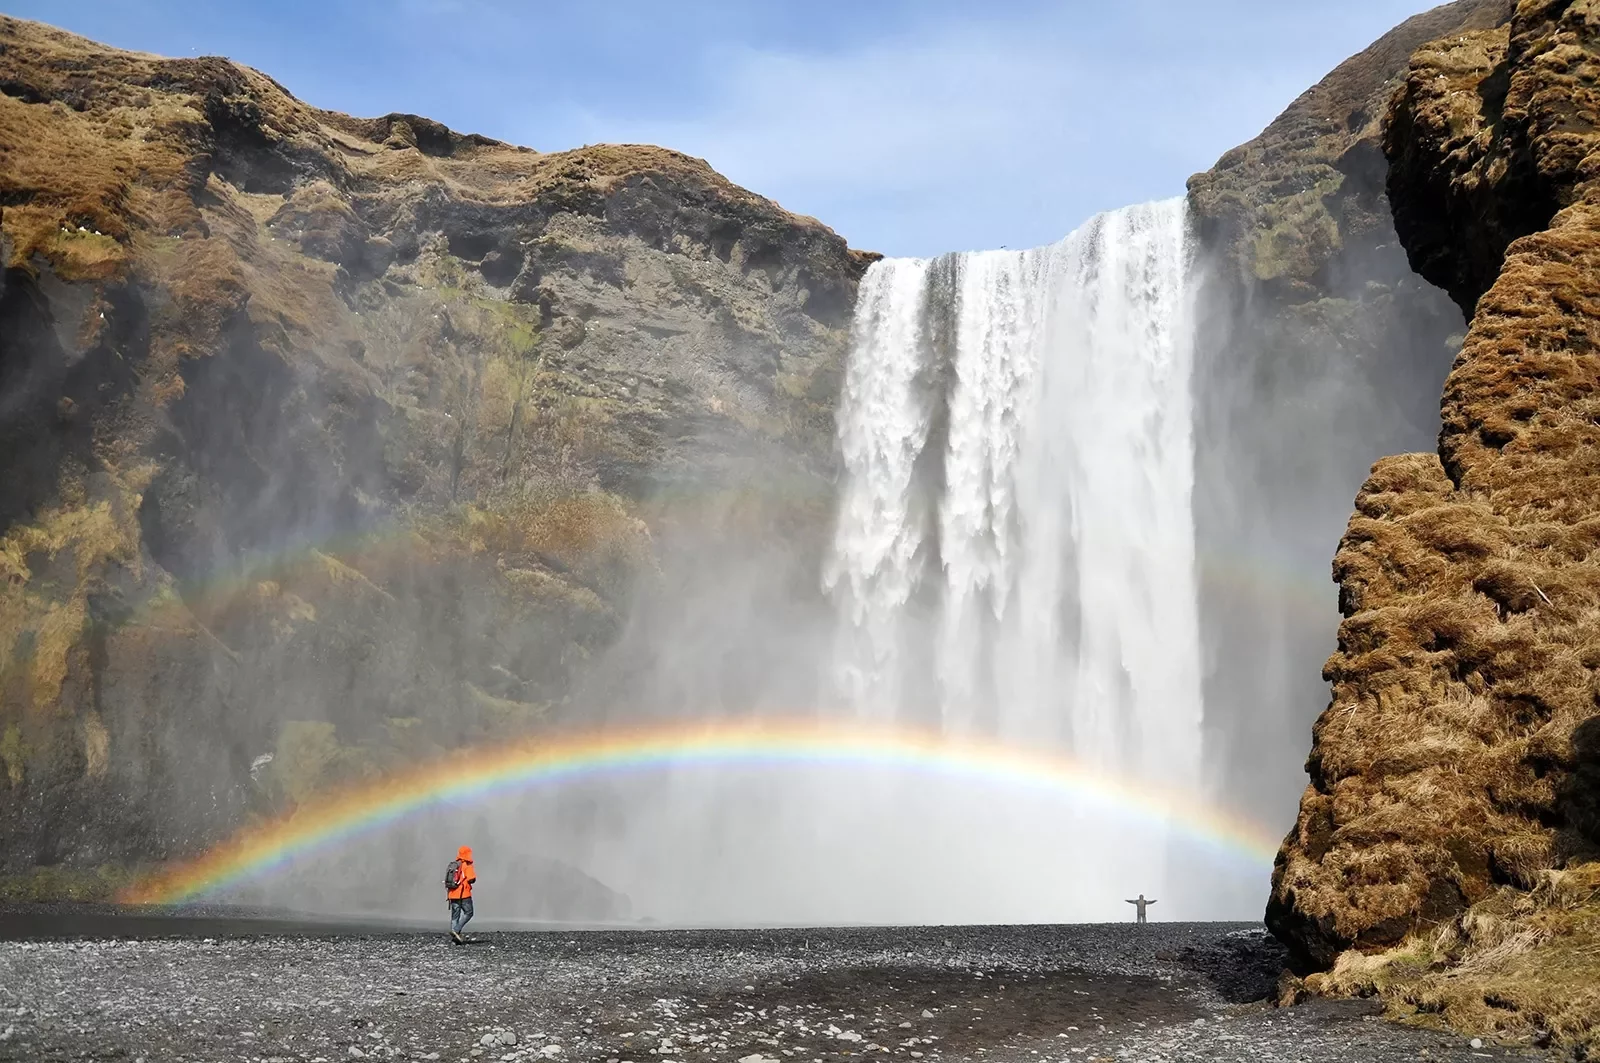 Waterfall with a full rainbow across it